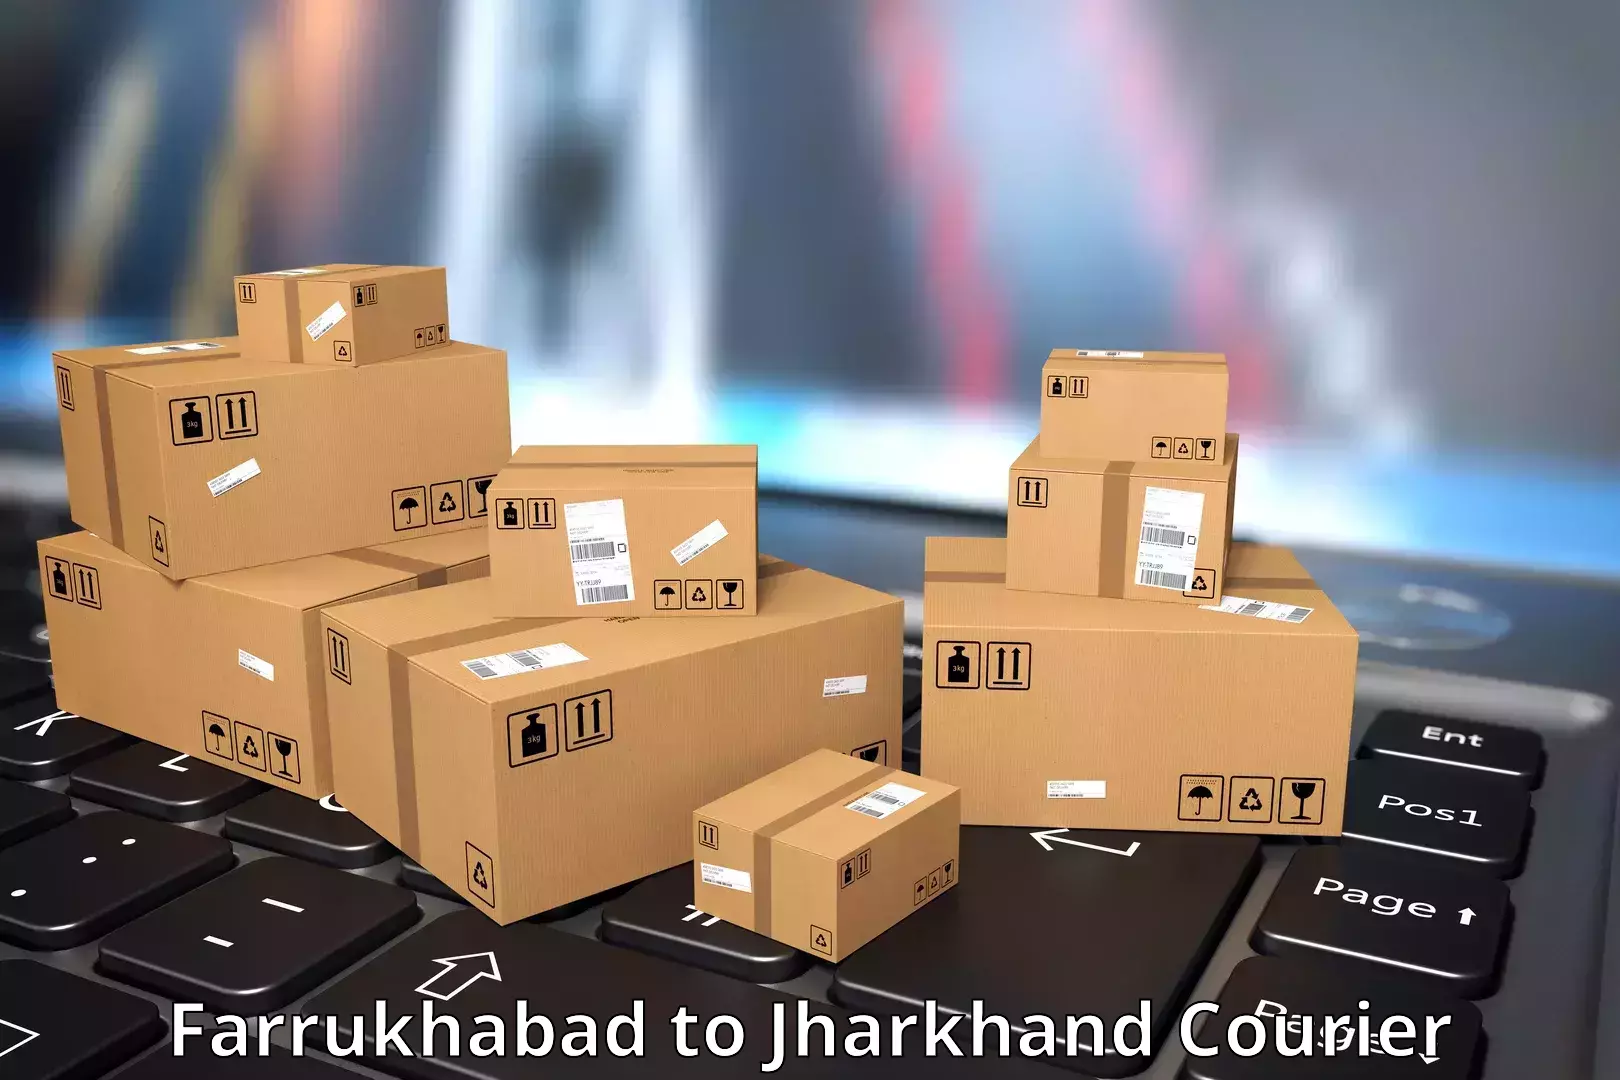 On-demand shipping options Farrukhabad to Jharkhand